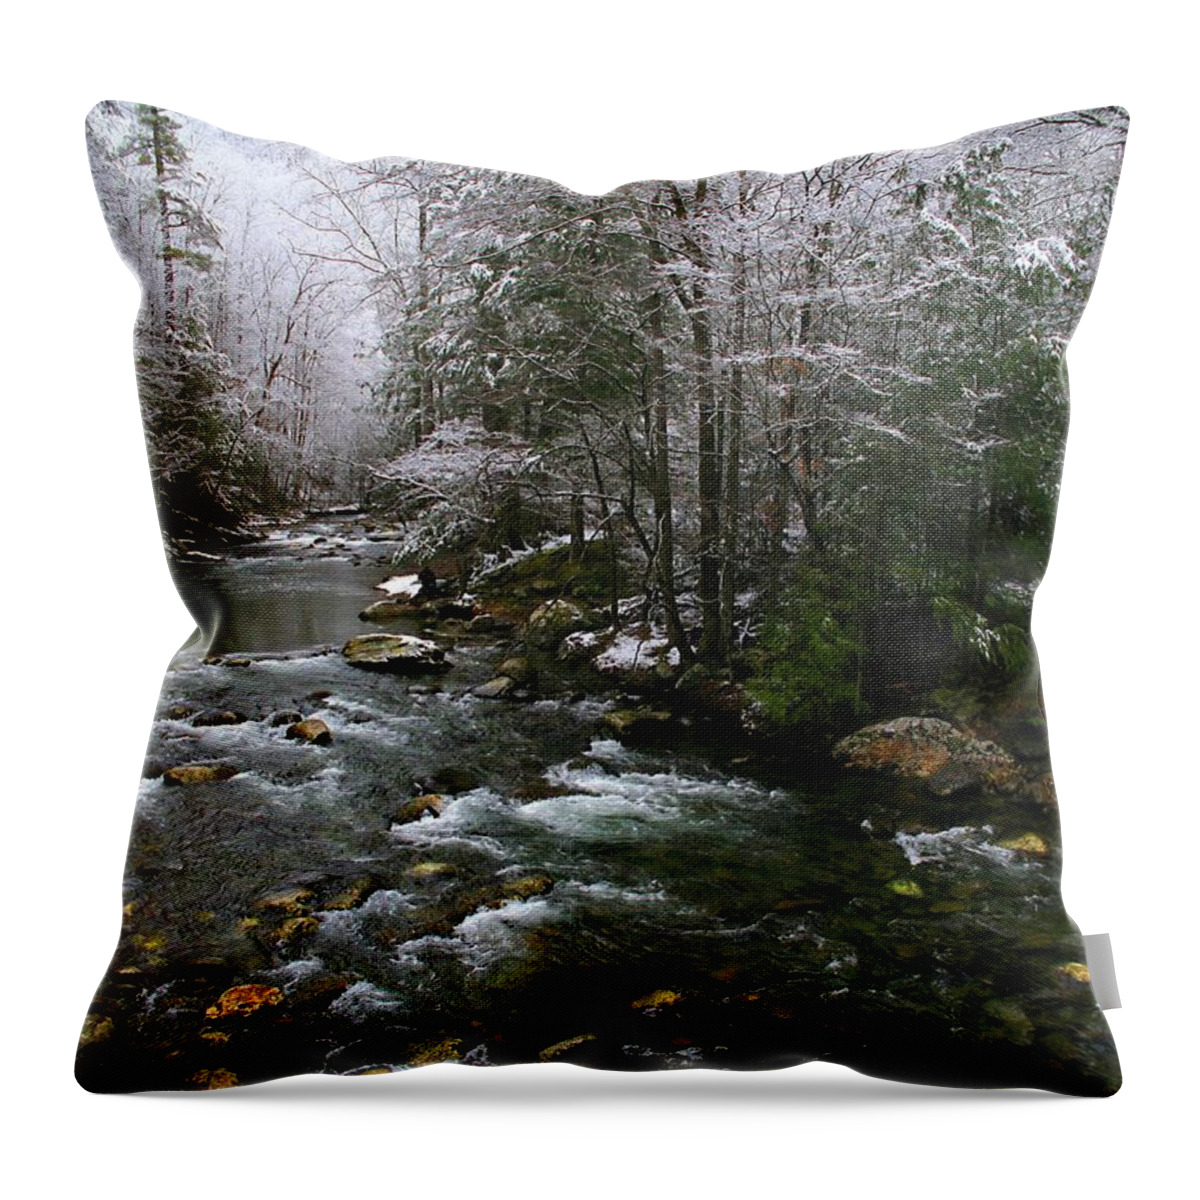 Smoky Mountain Stream Throw Pillow featuring the photograph Winter Fresh by Michael Eingle